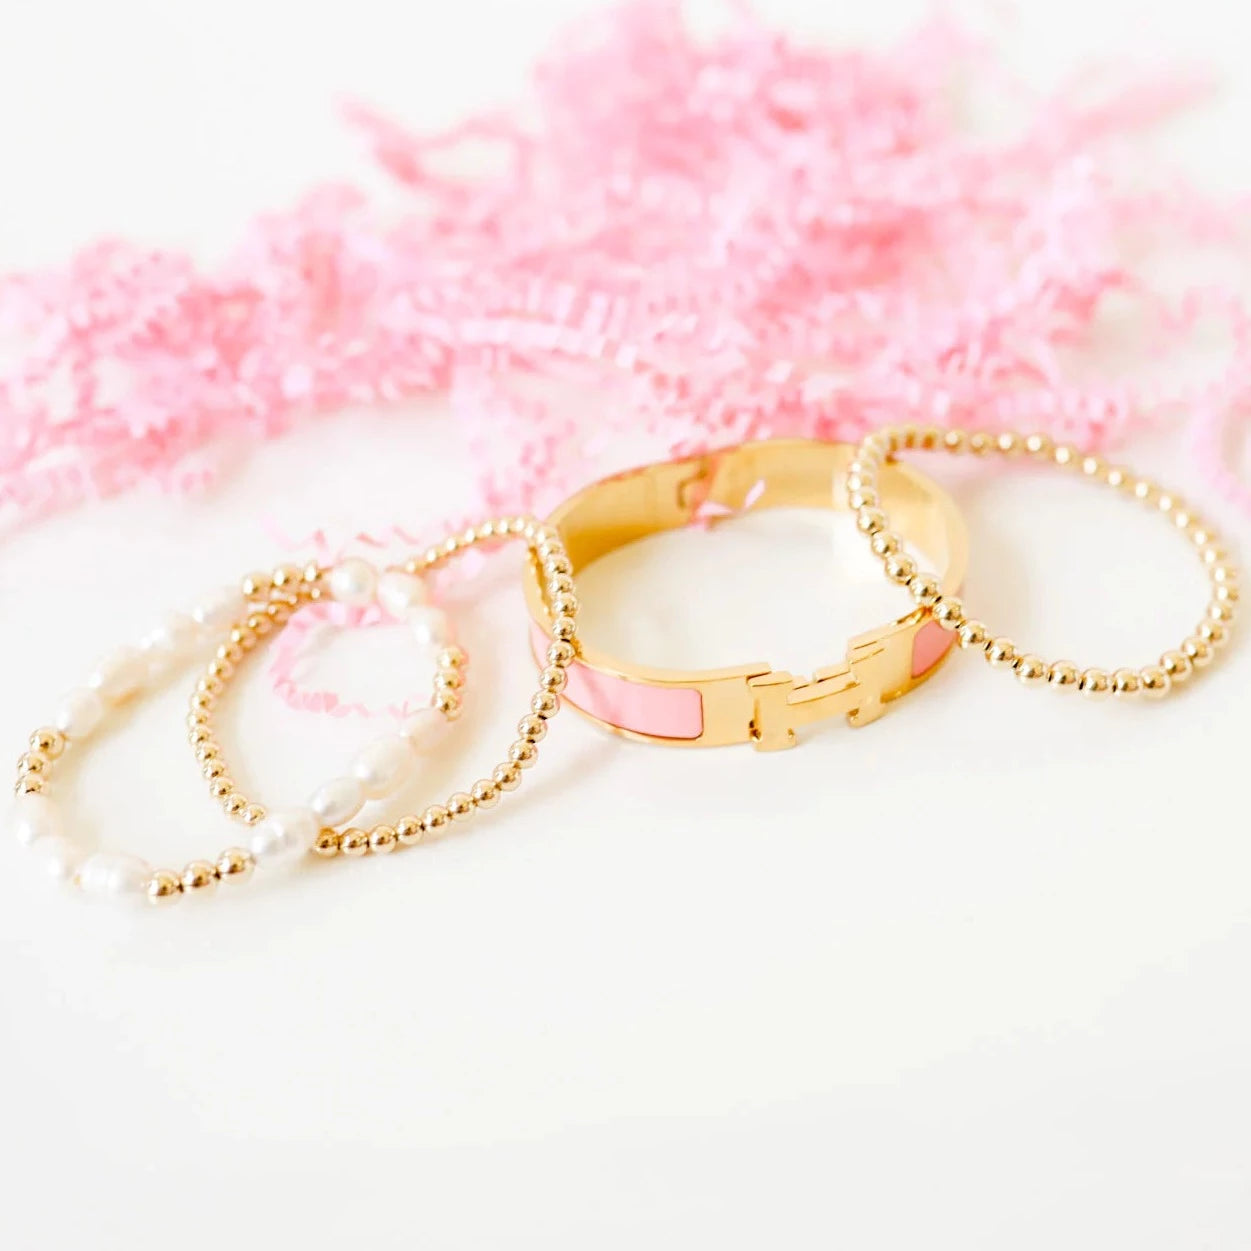 Beaded Blondes | Willow Pearl Bracelet in Gold - Giddy Up Glamour Boutique